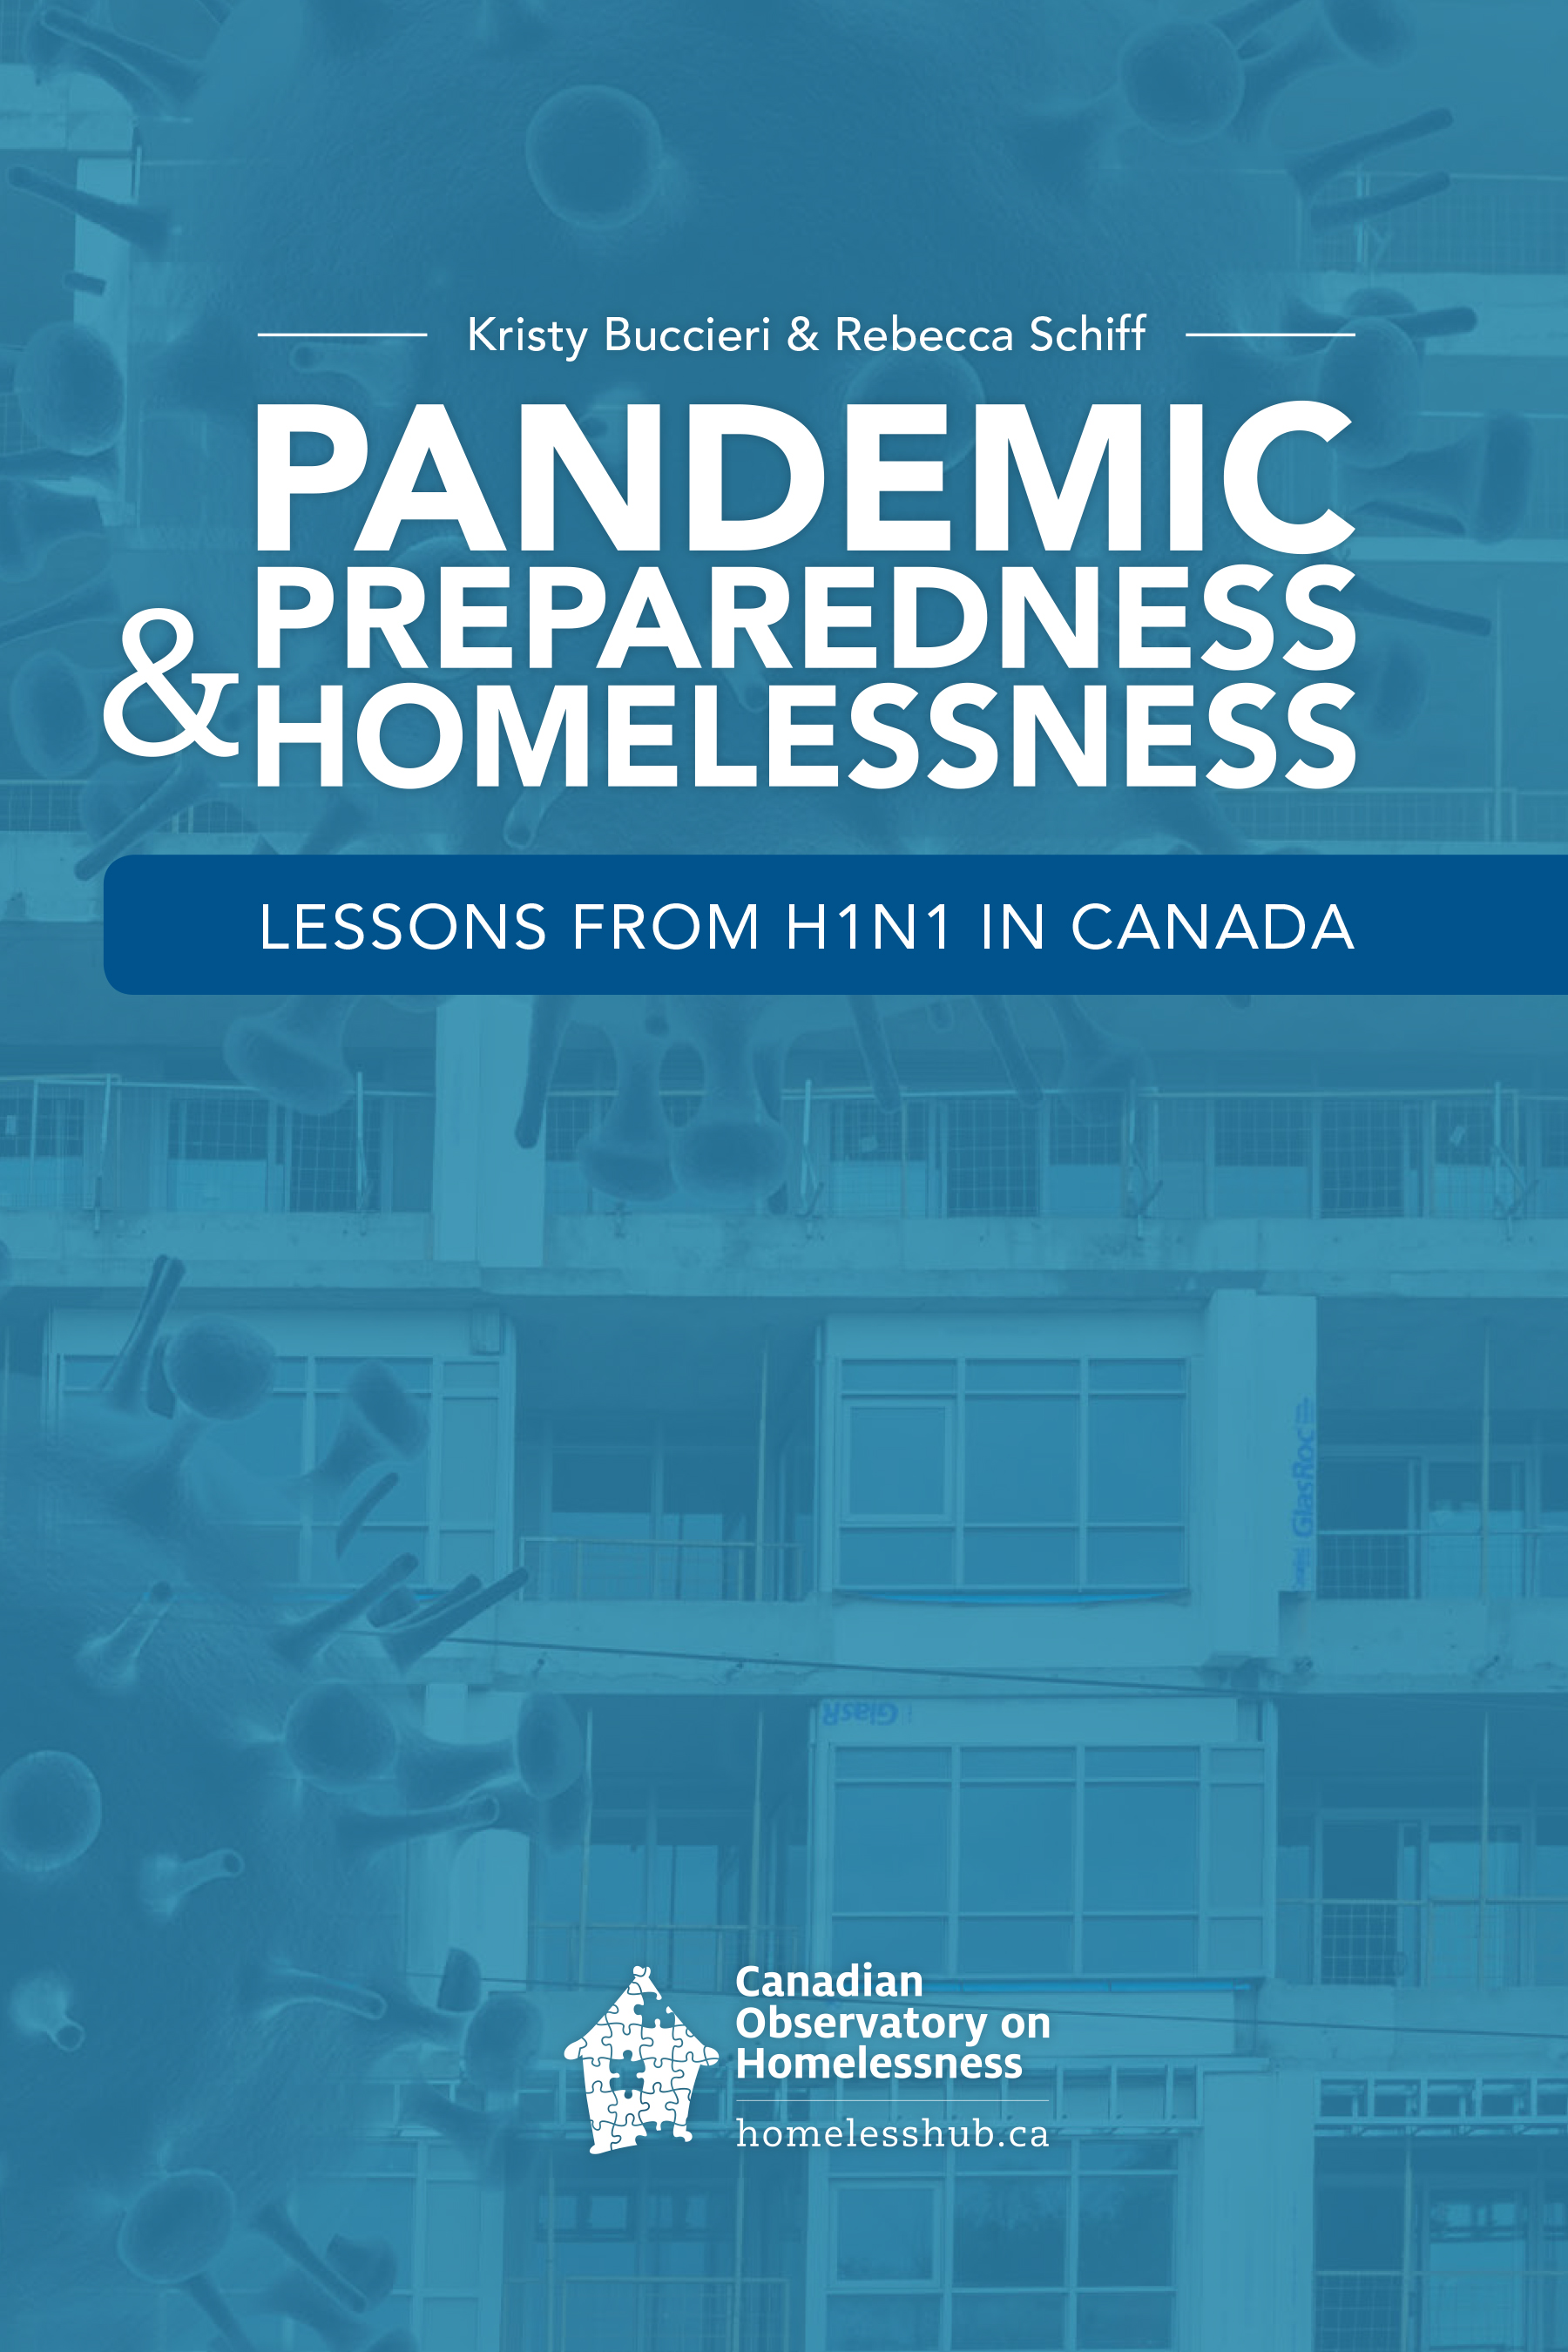 Download the book for free at http://www.homelesshub.ca/lessonsfromH1N1